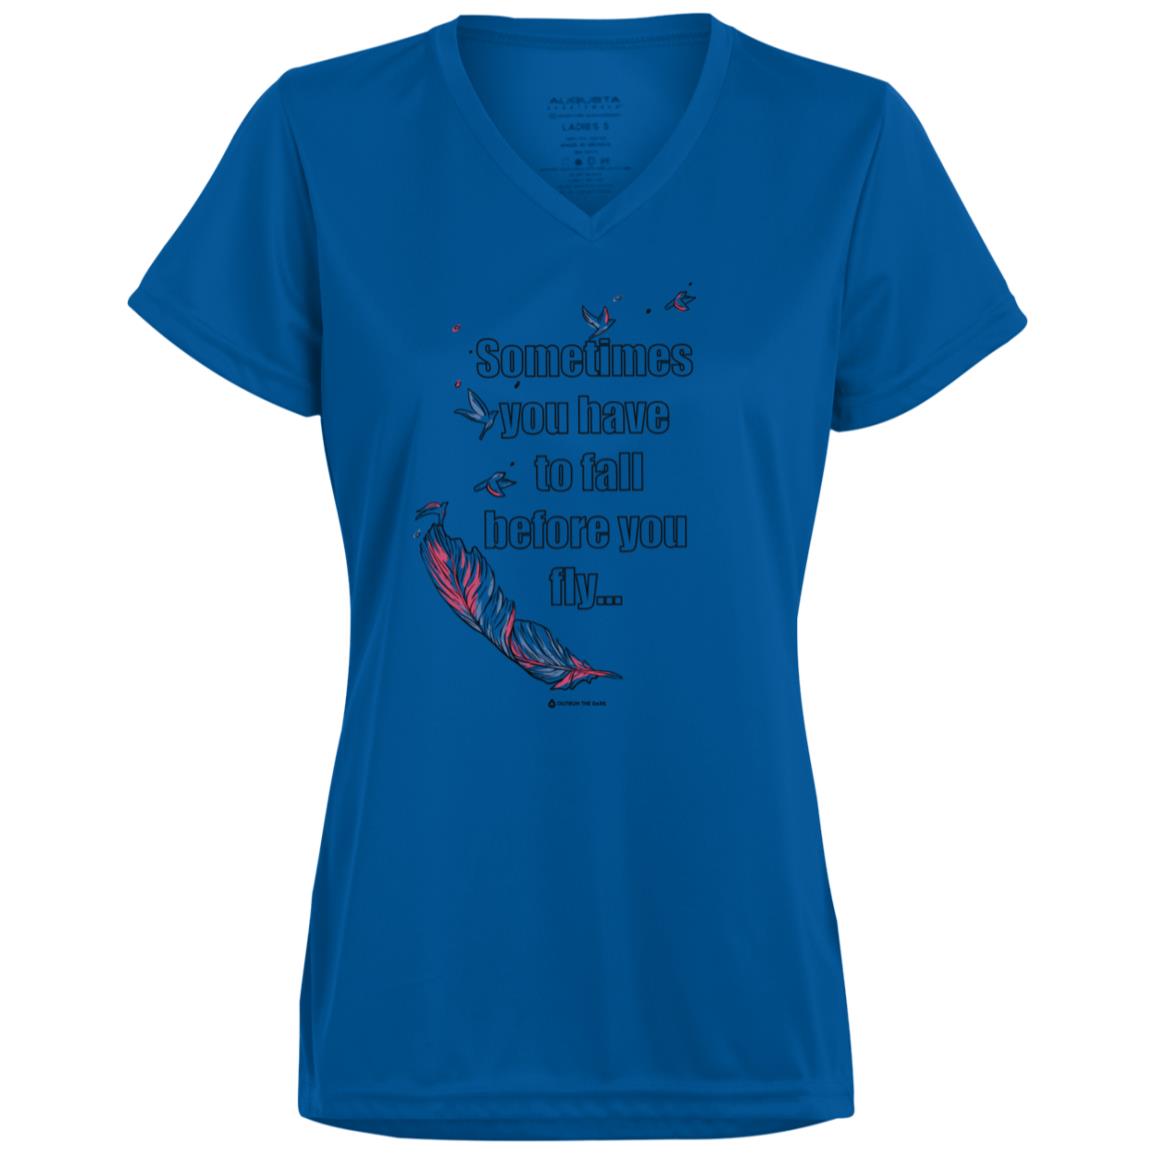 Before you fly Women's Performance V-neck Tee